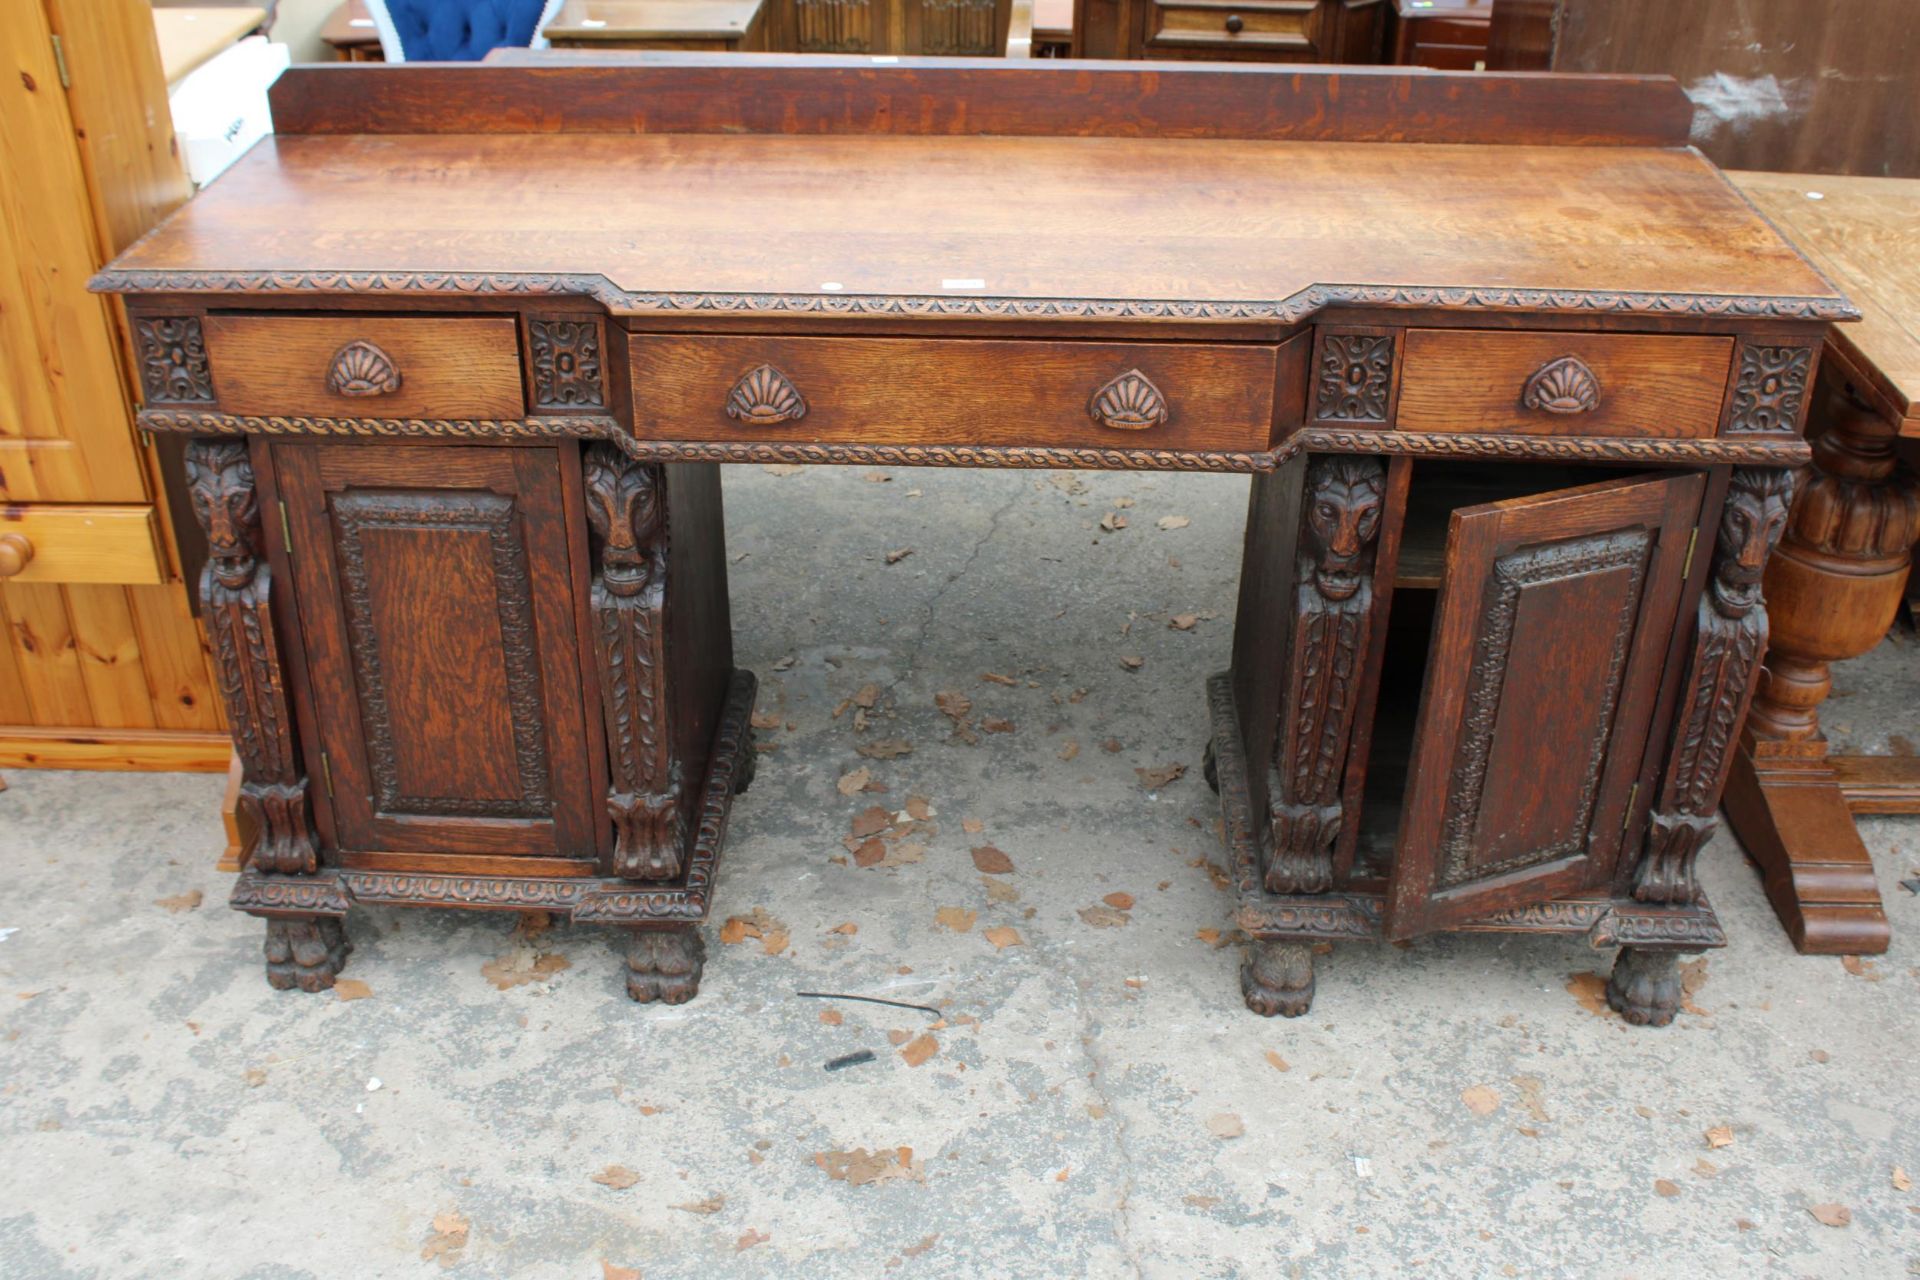 A VICTORIAN OAK BREAKFRONT SIDEBOARD ON CARVED CLAW FEET WITH CARVED PANELS WITH MYTHICAL